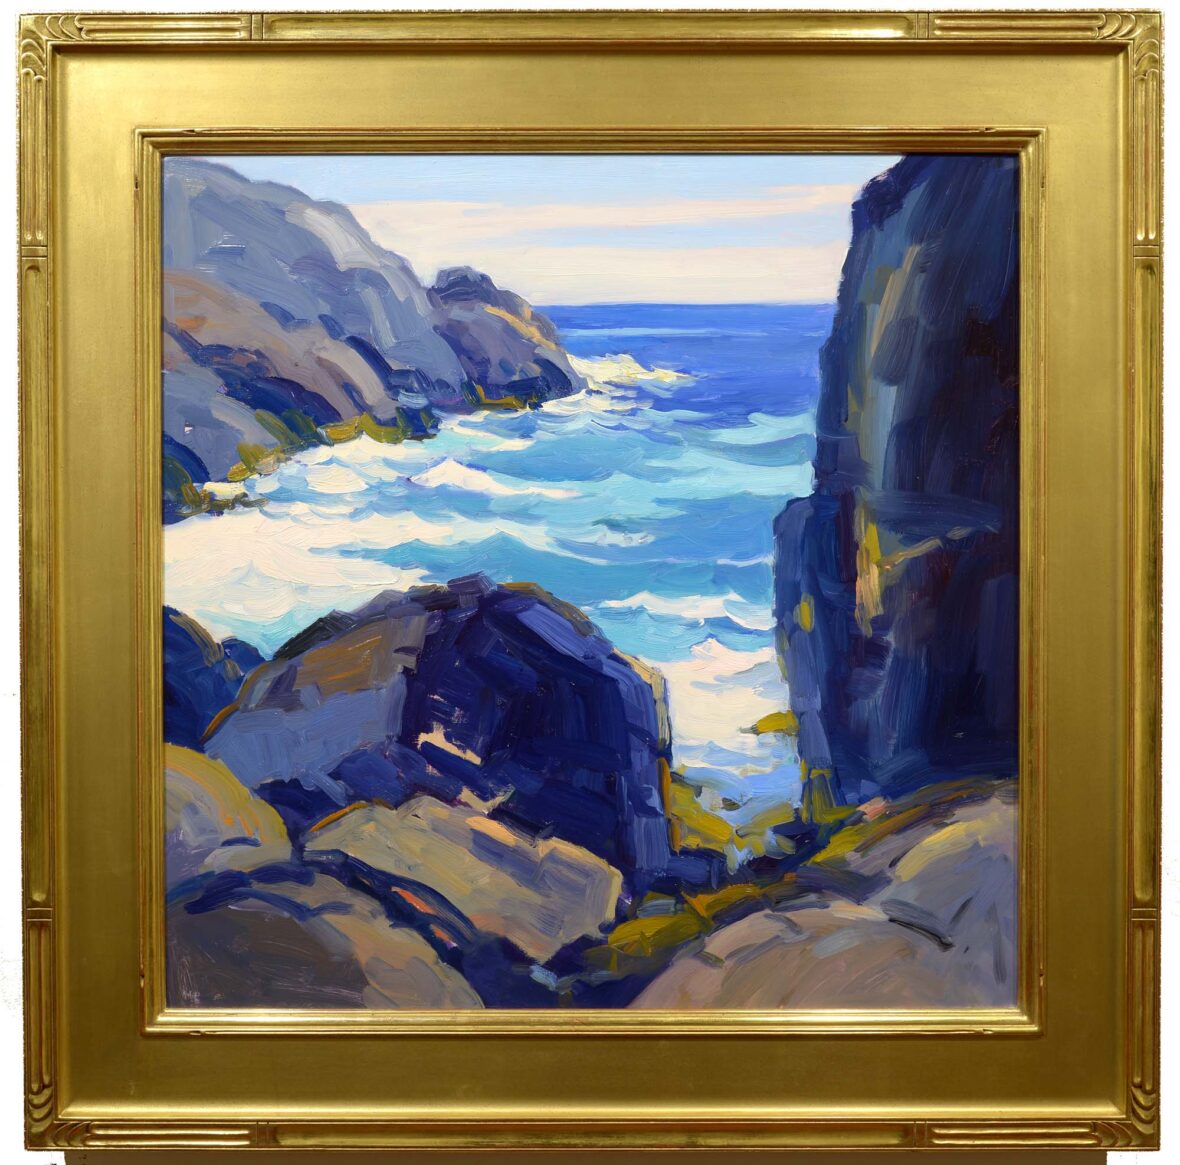 Keith Oehmig Early Morning, Squeaker Cove framed